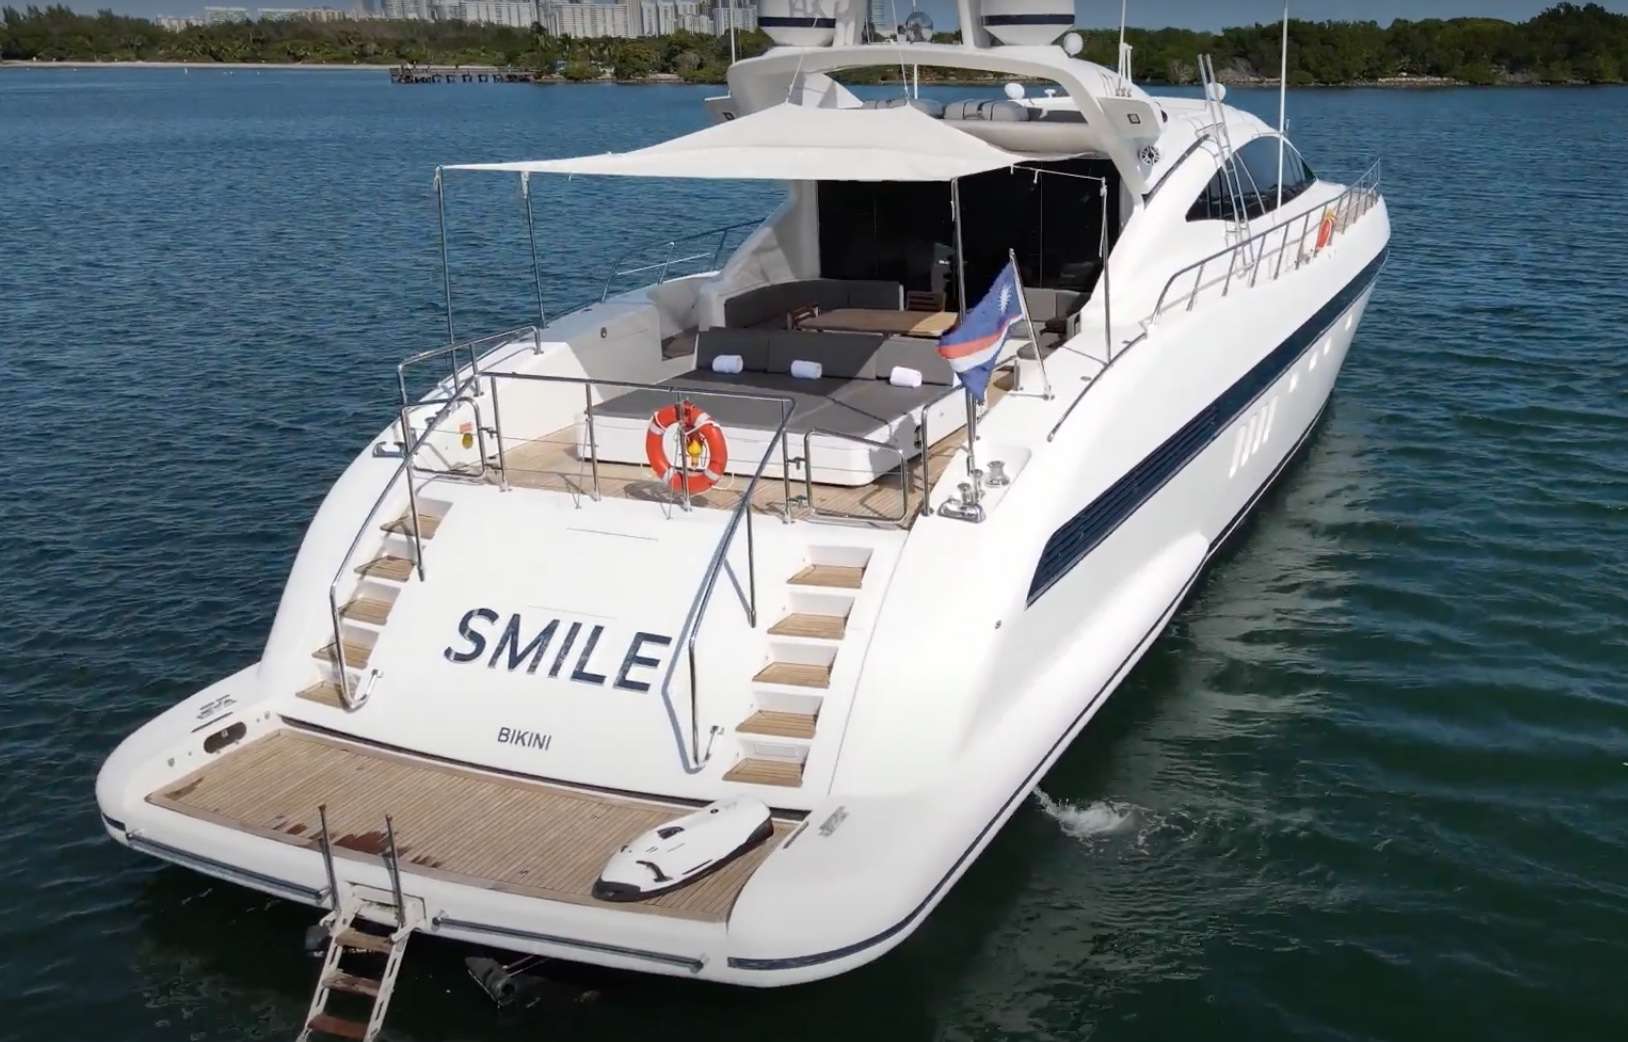 SMILE - Yacht Charter Fort Lauderdale & Boat hire in Florida & Bahamas 3